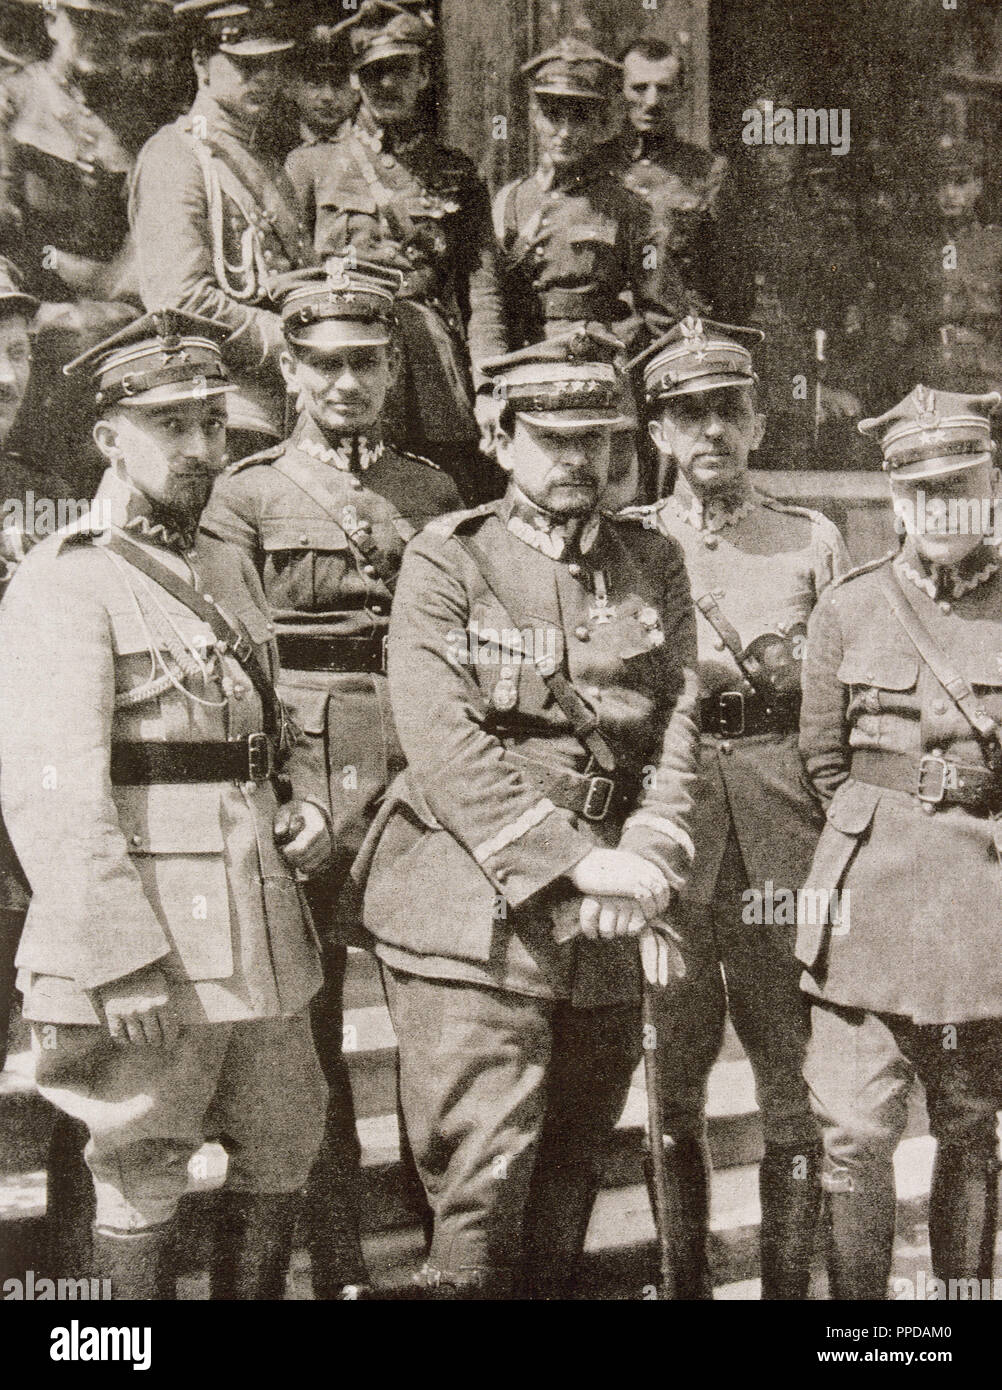 Haller de Hallenburg, Jozef (1873-1960). Polish military. He was one of the leaders of the nationalist opposition against Marshal Pitsudski. Haller surrounded by his officers in 1920. Stock Photo